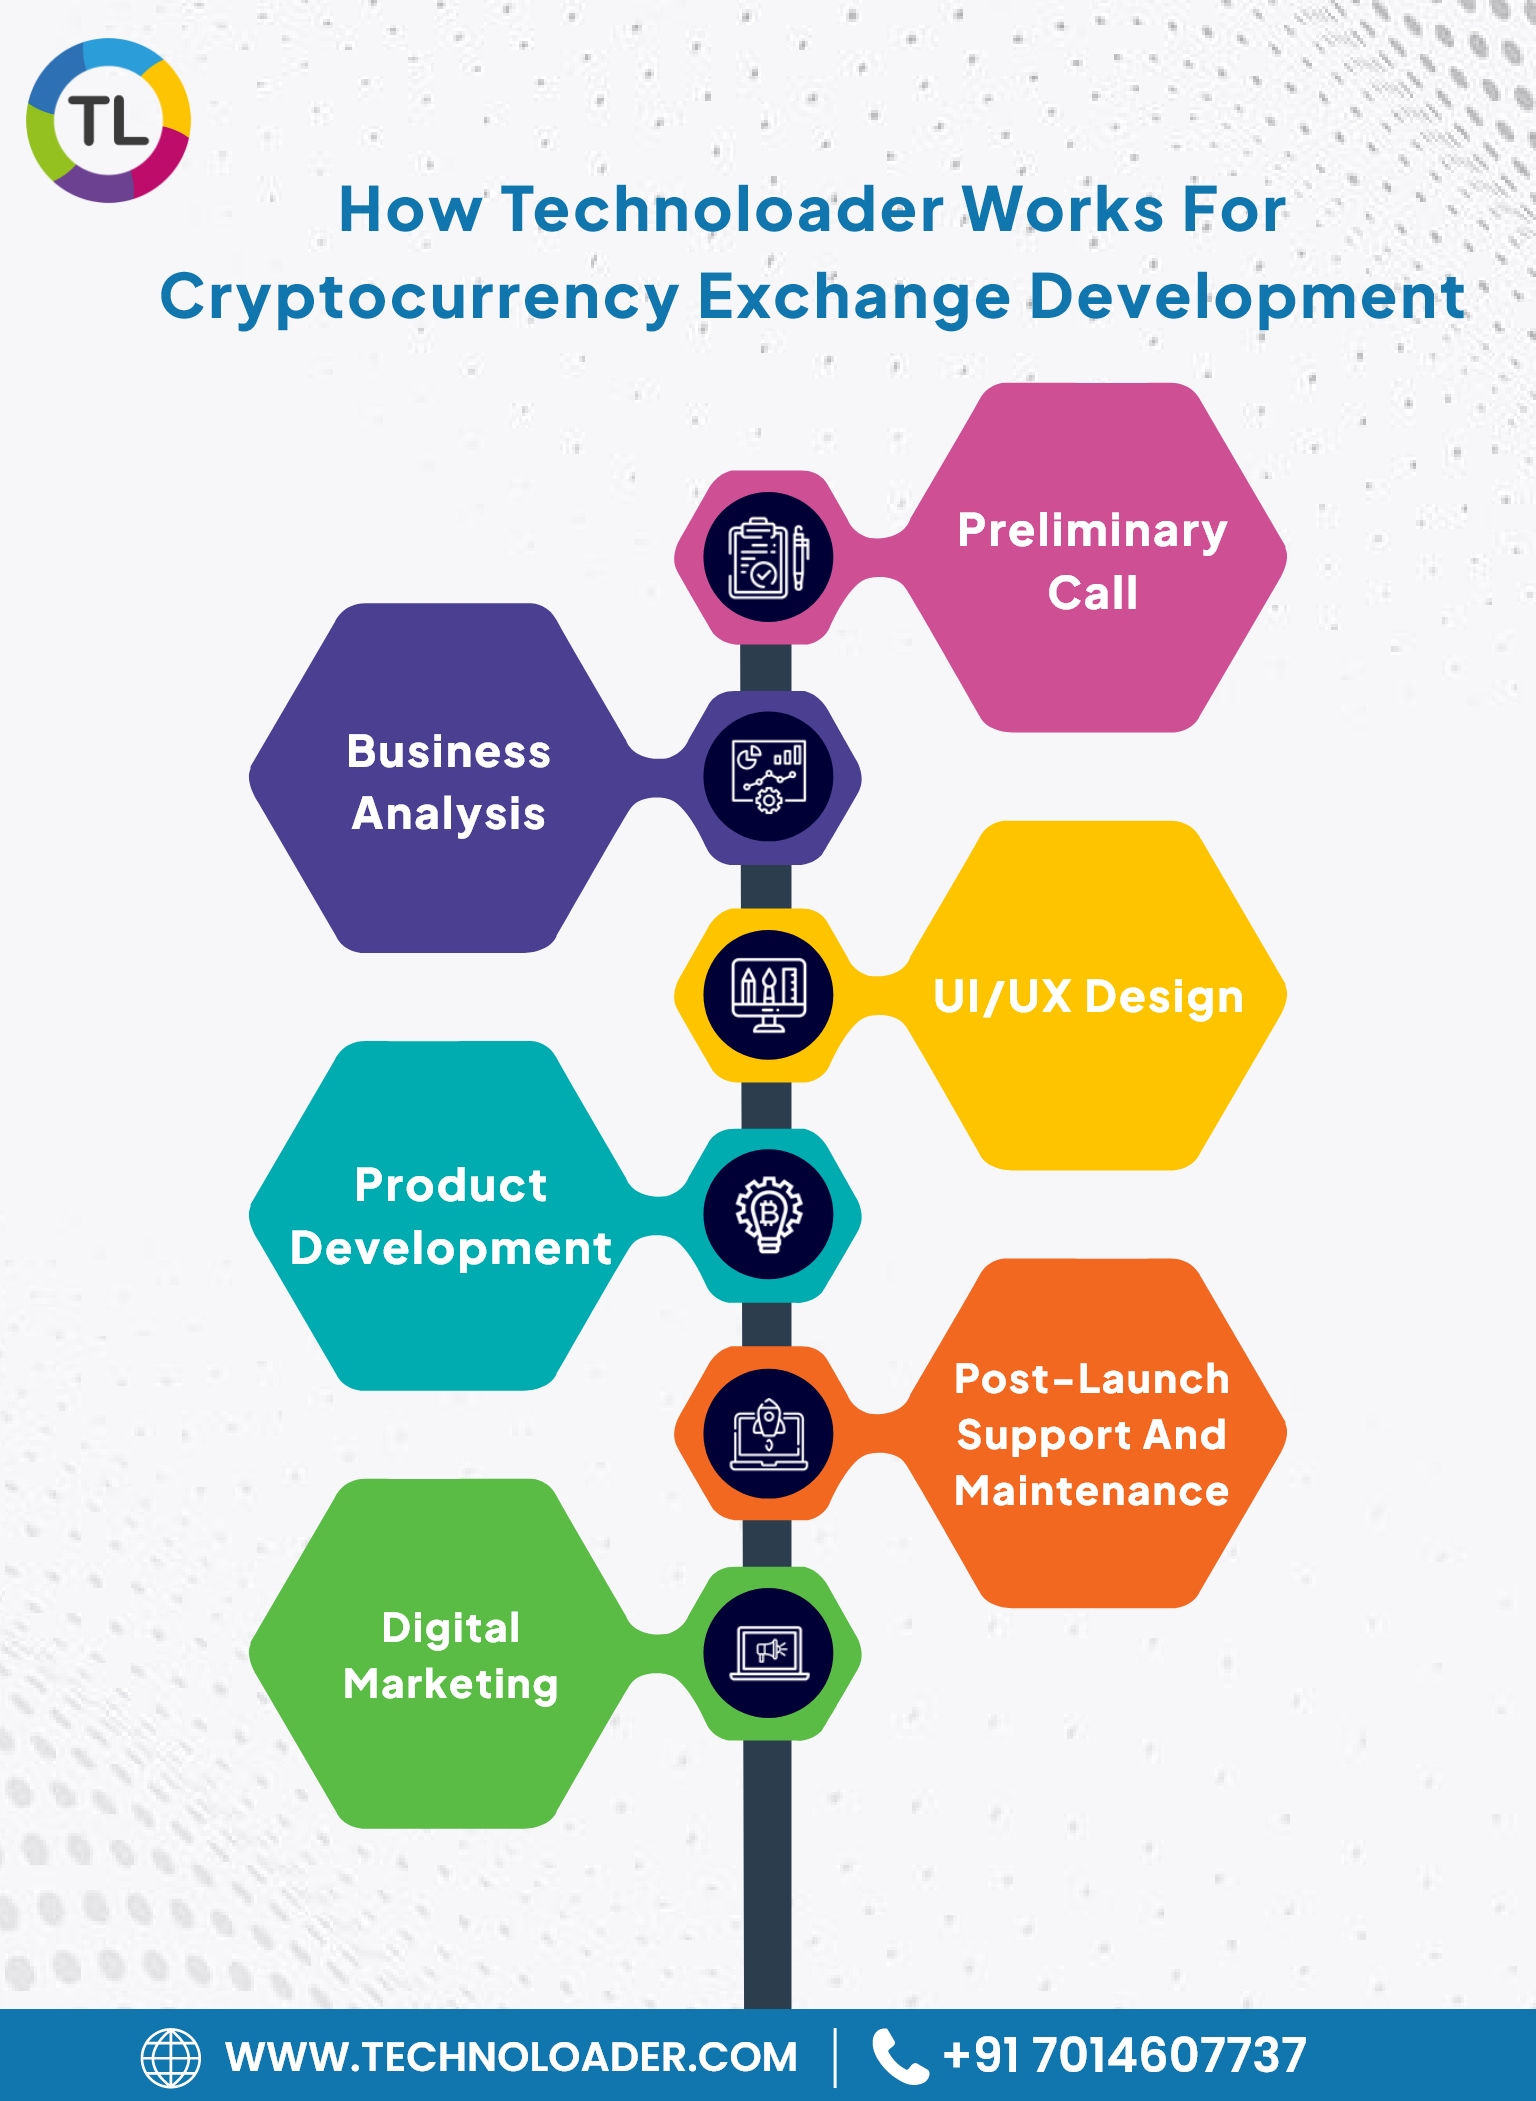 @
How Technoloader Works For

Cryptocurrency Exchange Development

Preliminary
Call

Business
Analysis

Product
Development

Post-Launch
Support And
Maintenance

Digital
Marketing

 

@ WWW.TECHNOLOADER.COM | & +917014607737